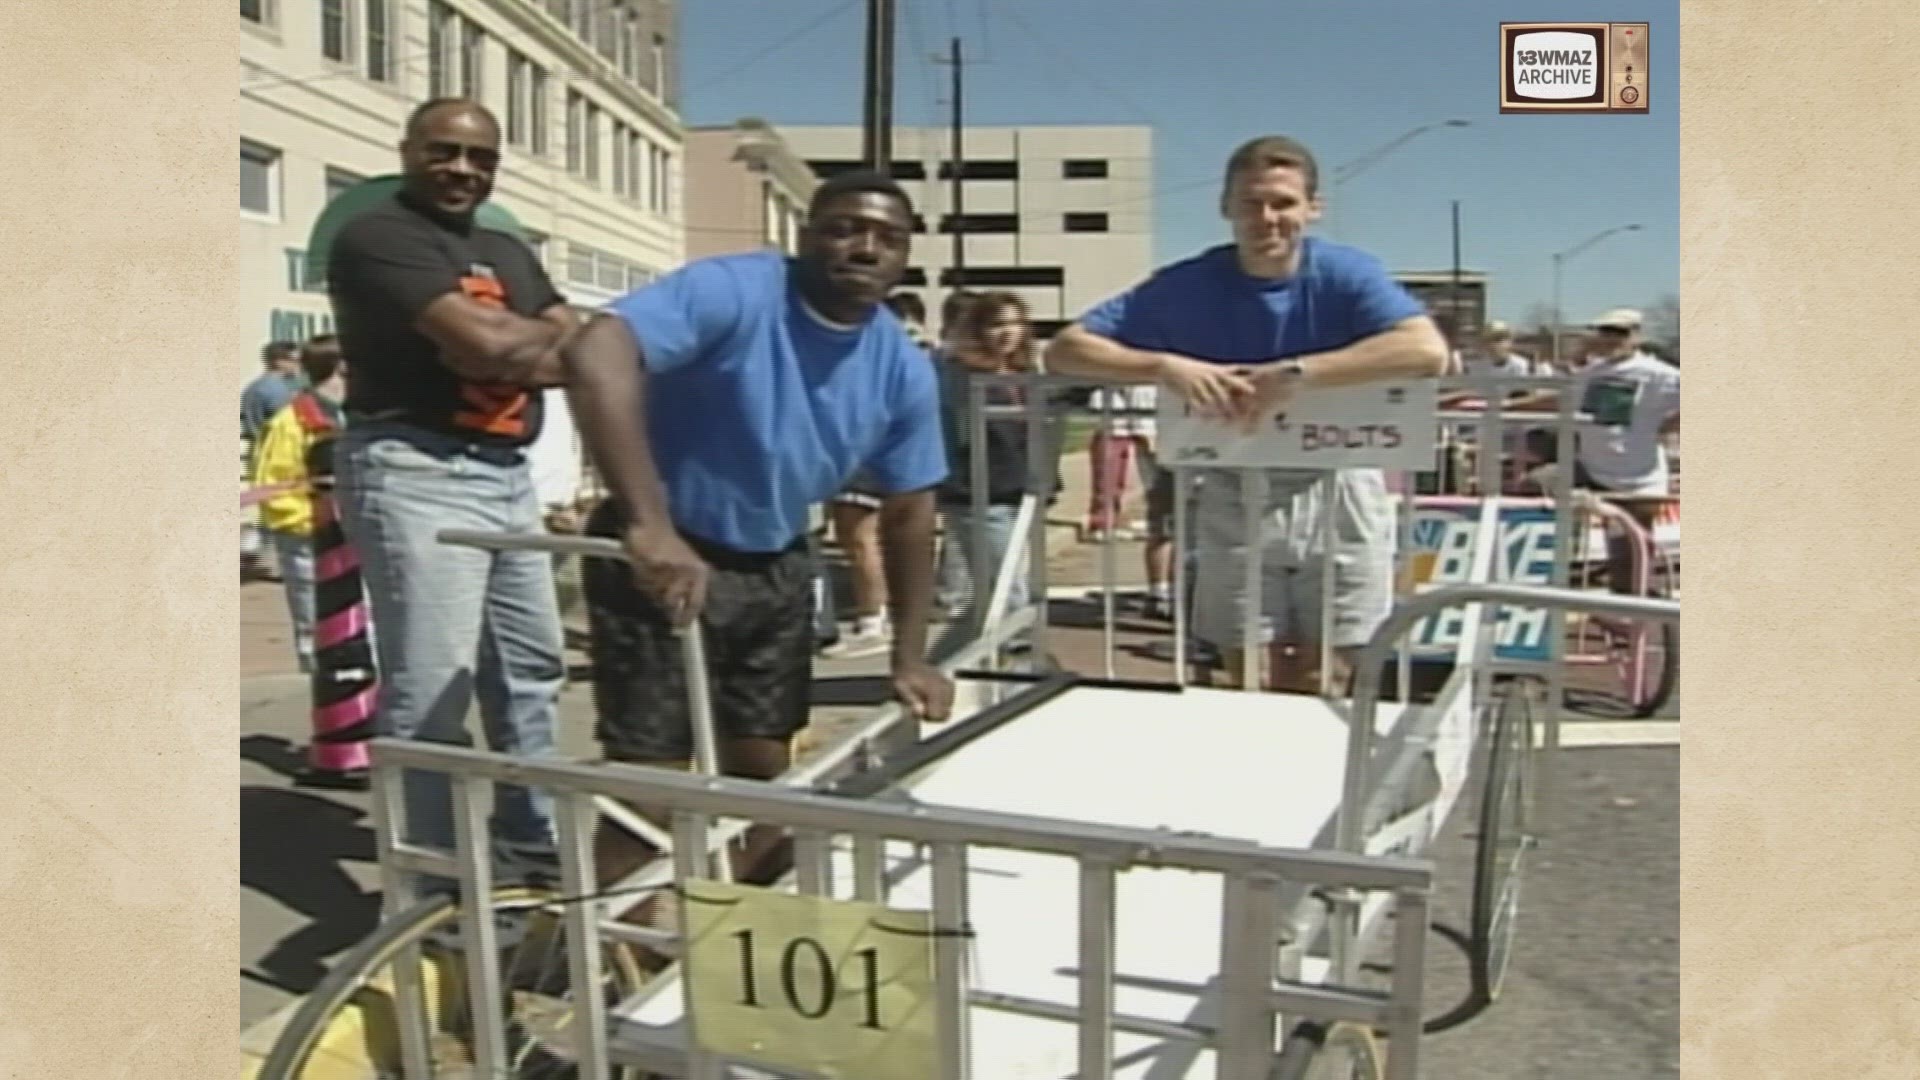 Back in 1997, dozens of local businesses and organizations formed teams and constructed rolling beds for the Cherry Blossom Festival Bed Race.